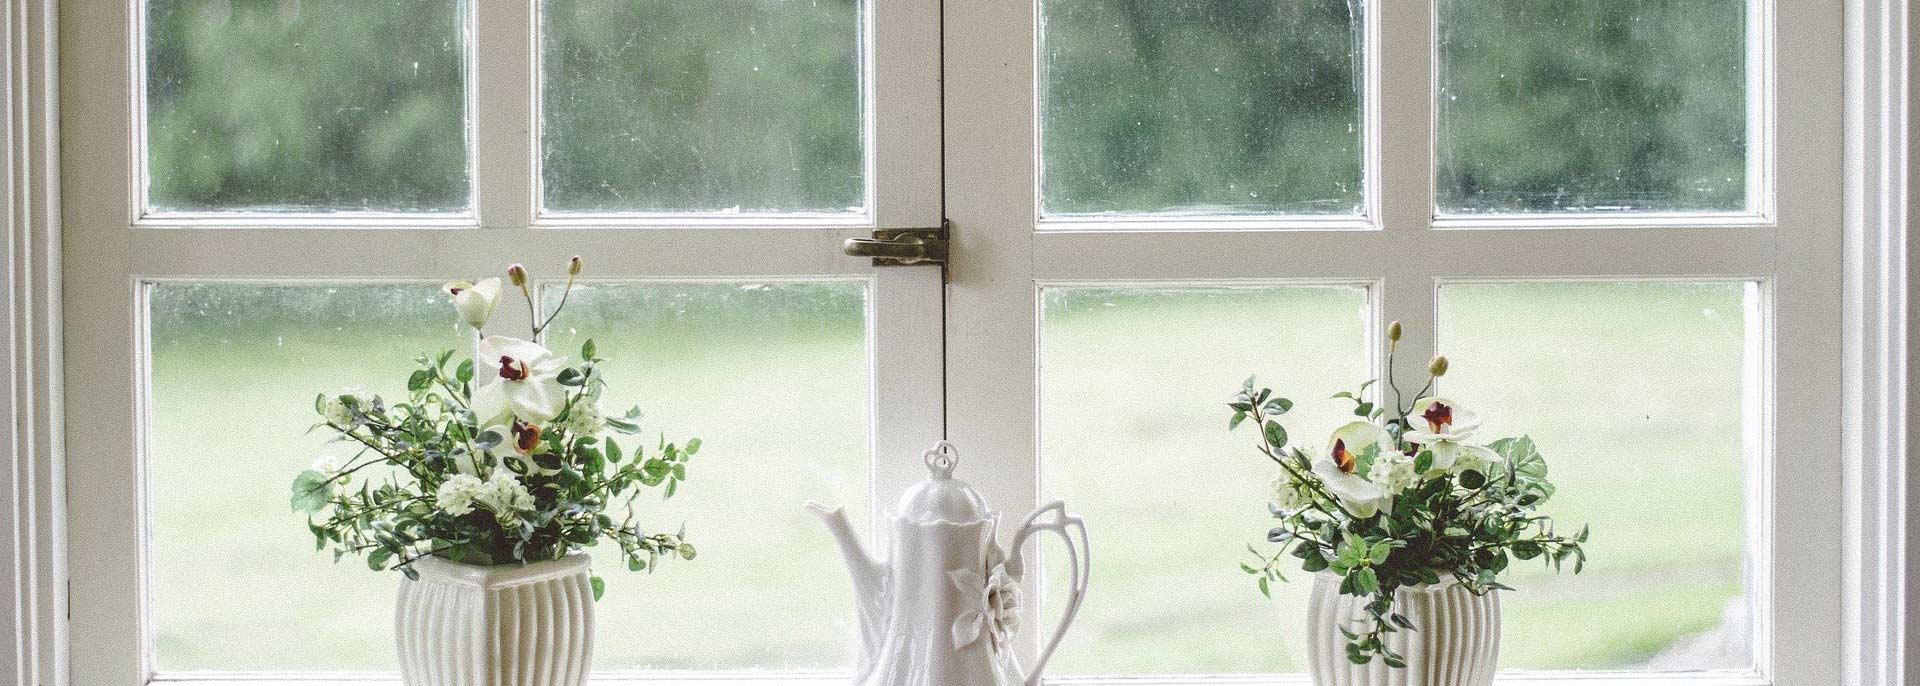 How to choose the right lock or restrictor for your window